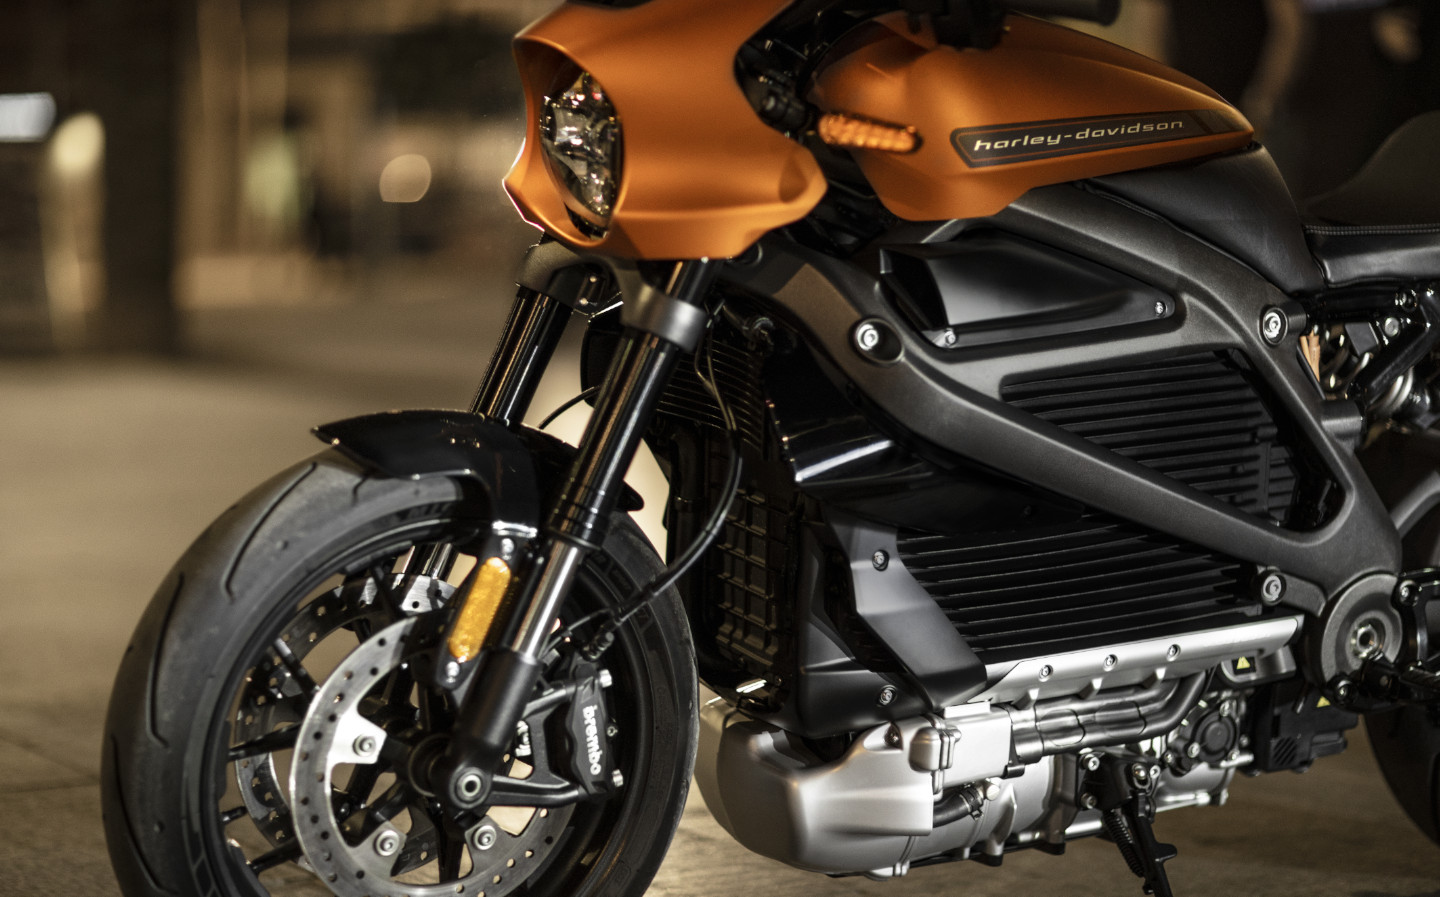 2020 Harley-Davidson Livewire electric motorcycle review